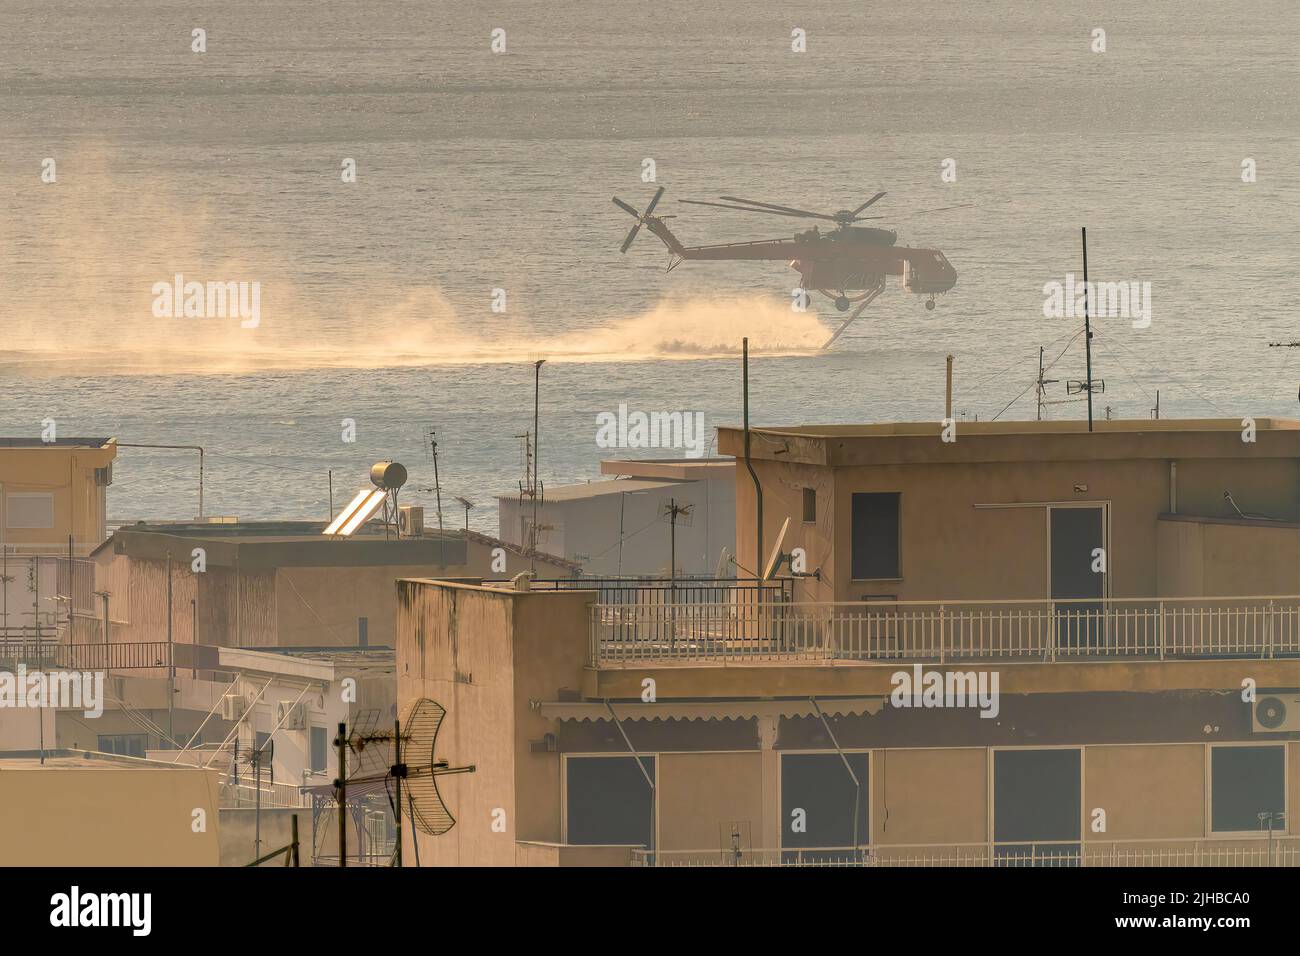 Loutraki, Greece 14 September 2019. Fire helicopter gathering water at Loutraki in Greece for the big fire. Stock Photo